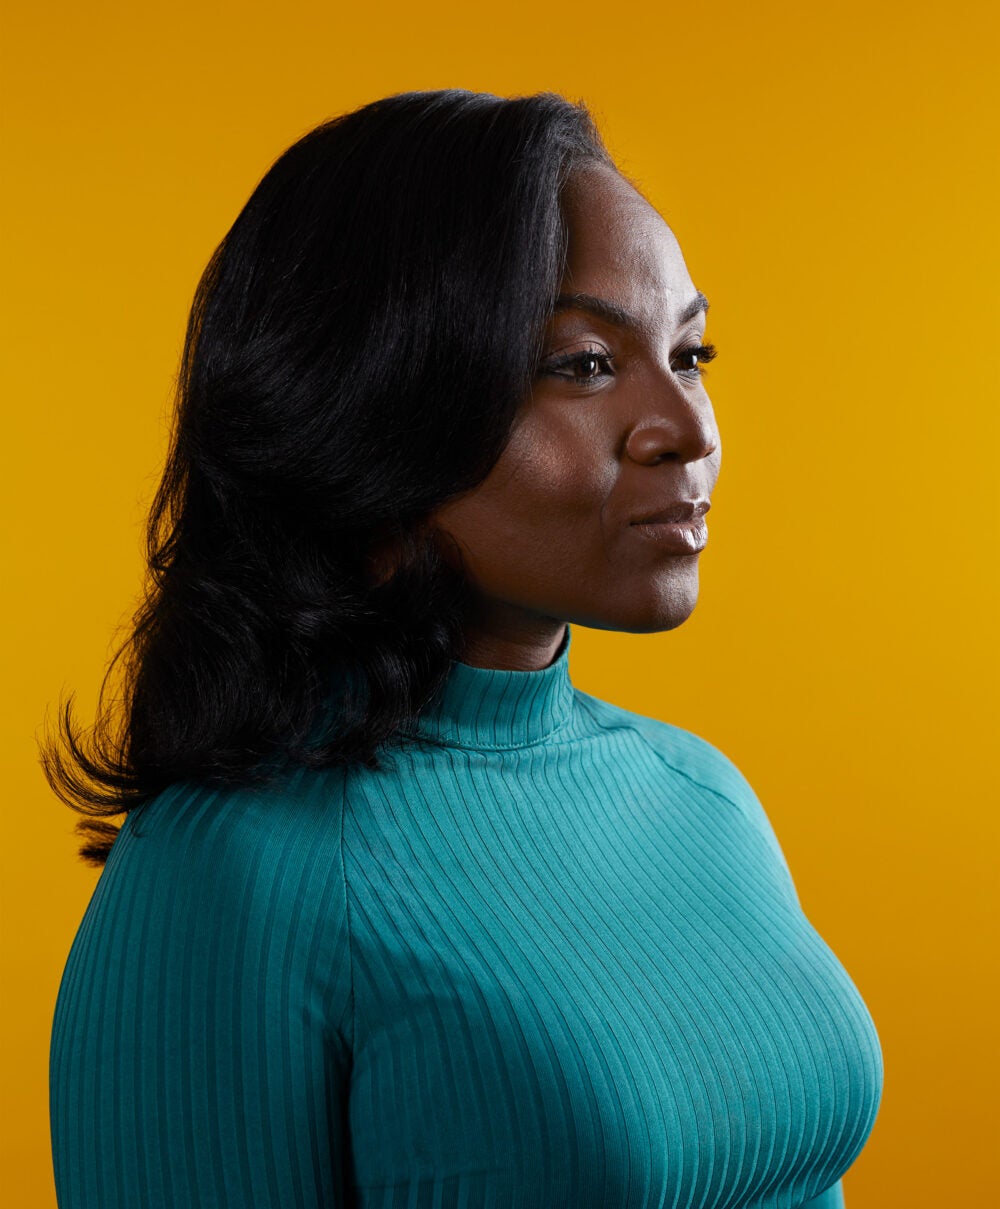 Kizzmekia Corbett wearing a longsleeve, teal turtleneck dress, looks off camera with a serious and powerful expression.